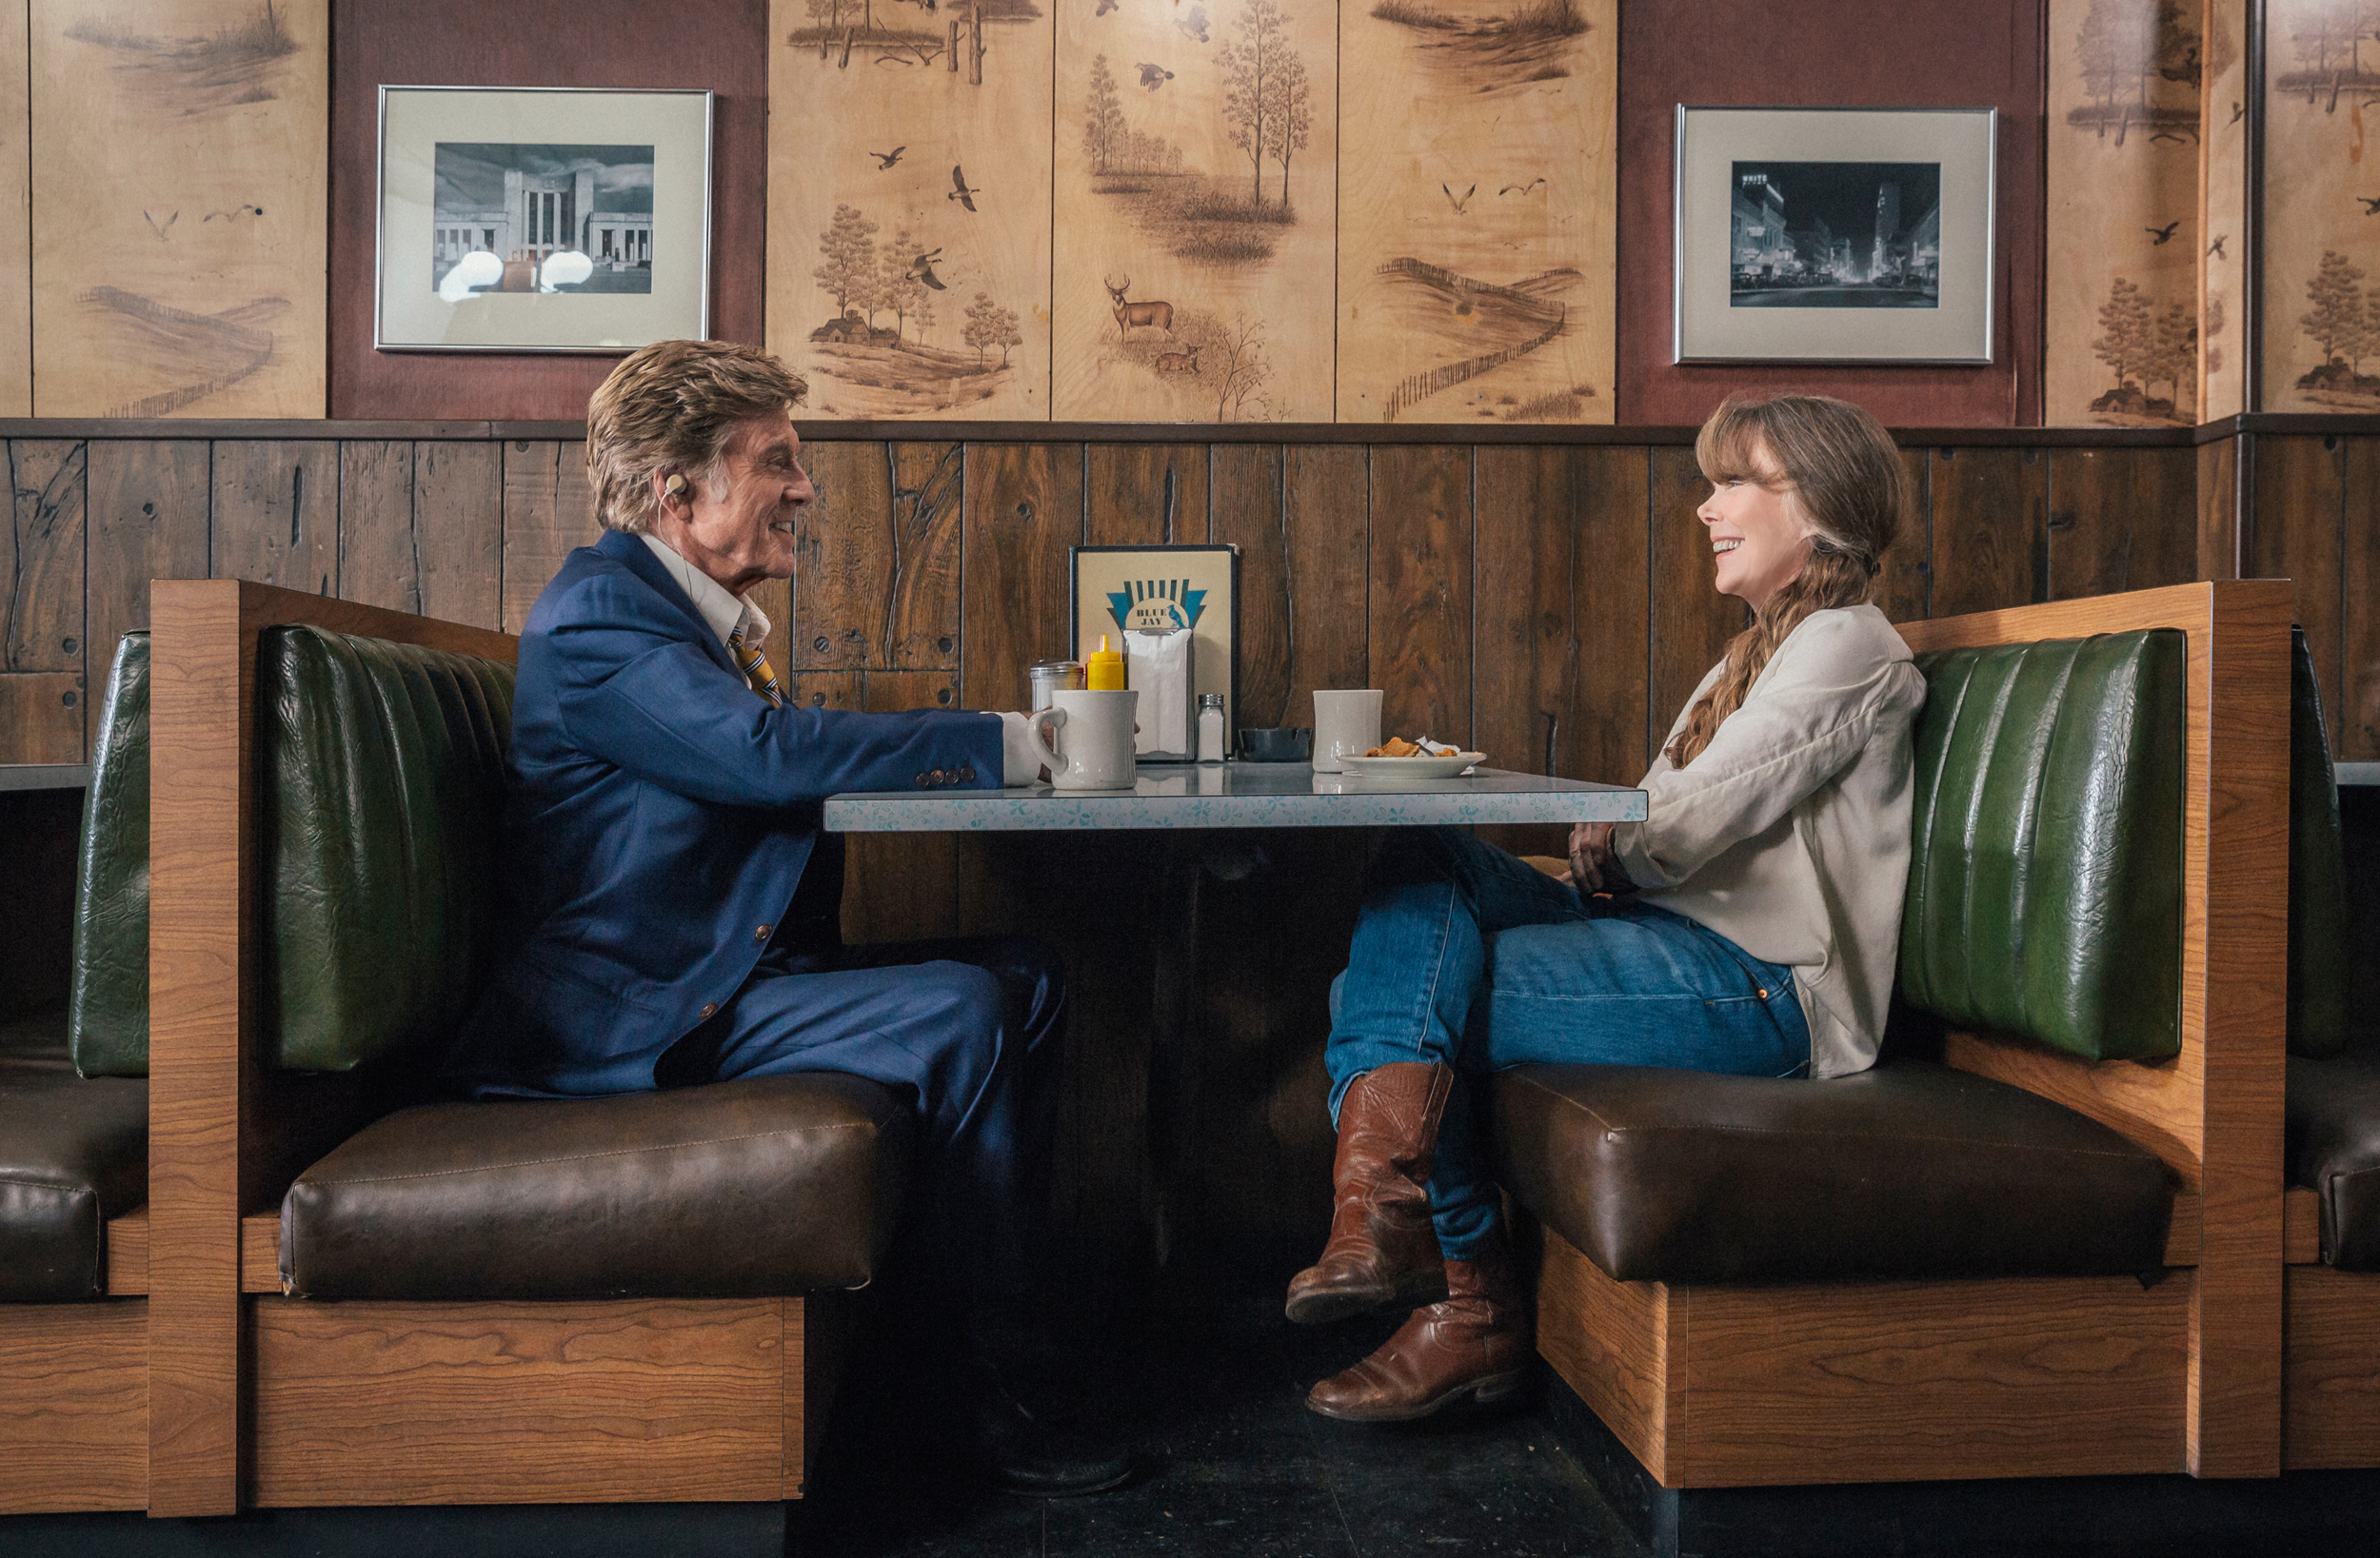 PHOTO: Robert Redford as "Forrest Tucker" and Sissy Spacek as "Jewel" in the film THE OLD MAN & THE GUN.